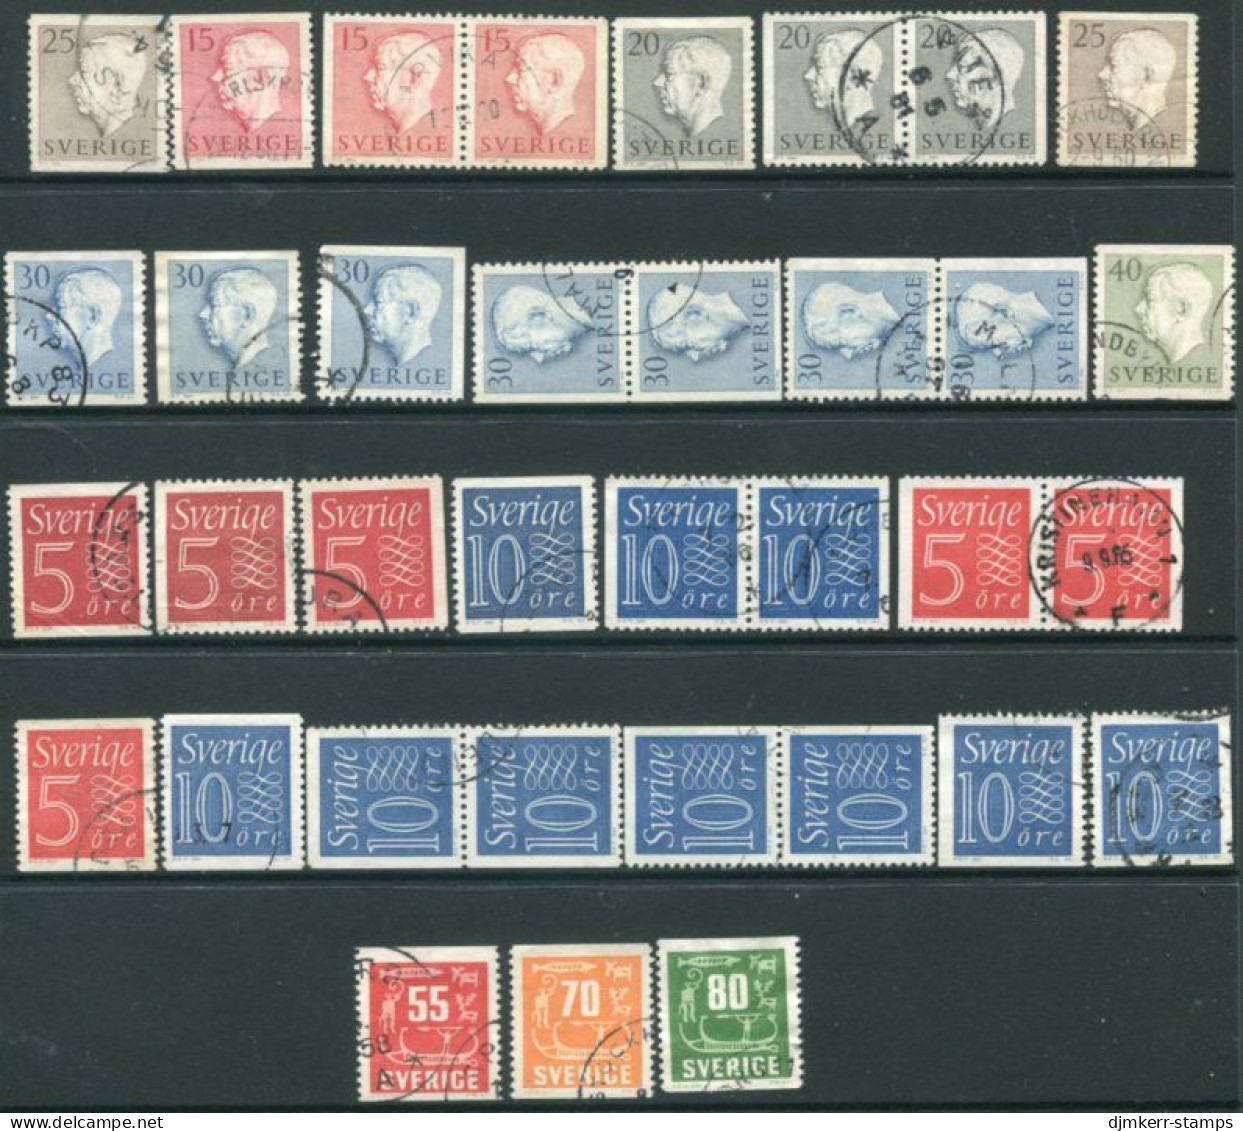 SWEDEN 1957 Complete Definitive Issues Used.  Michel 423-433 - Usati